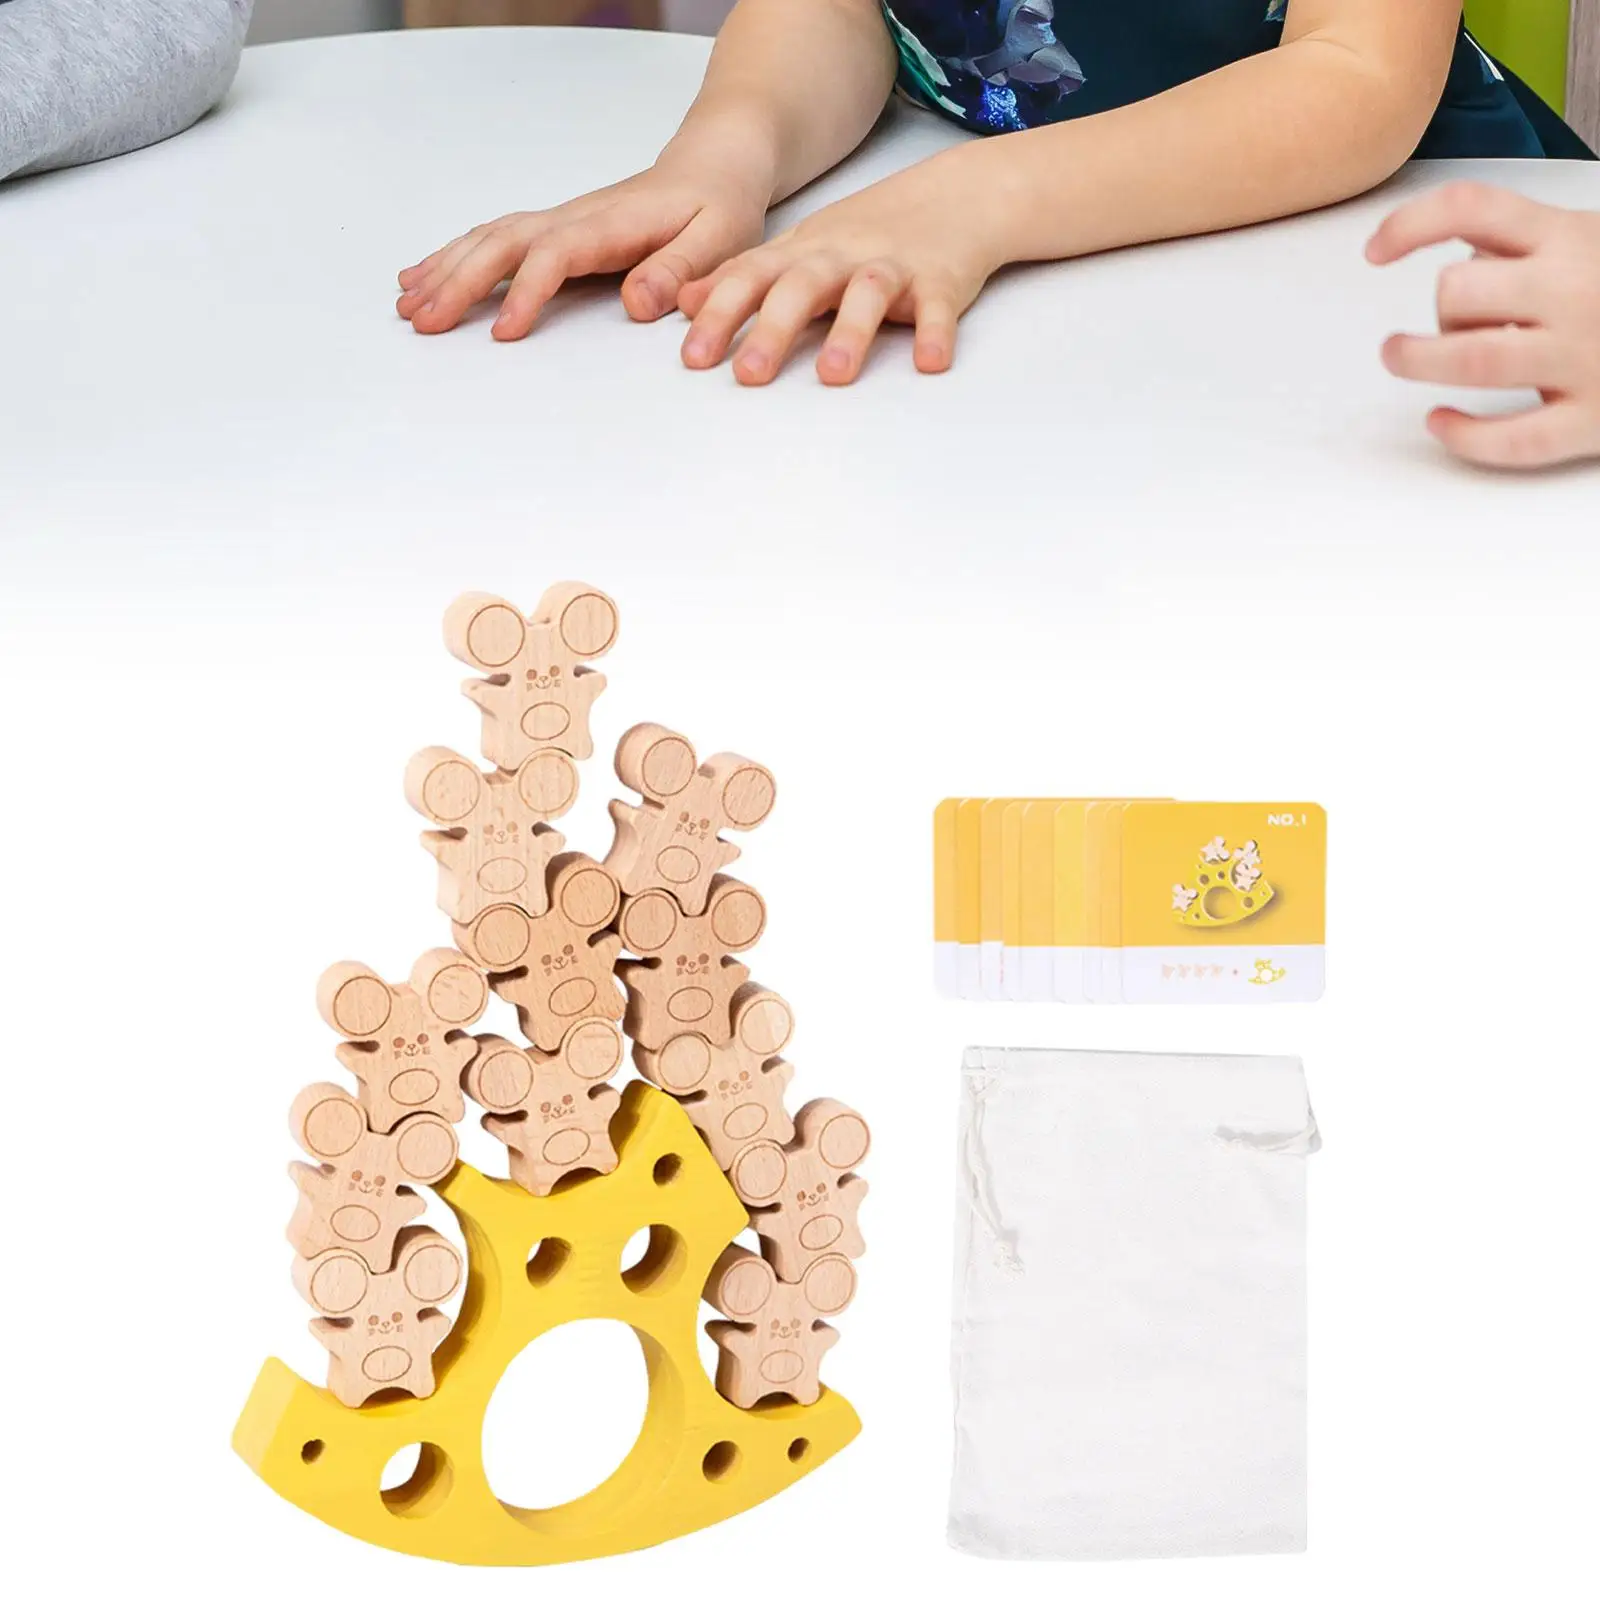 Montessori Balance Game Early Educational Toy Interactive Balancing Building Blocks for Girls Boys Age 4 5 6 Birthday Gifts